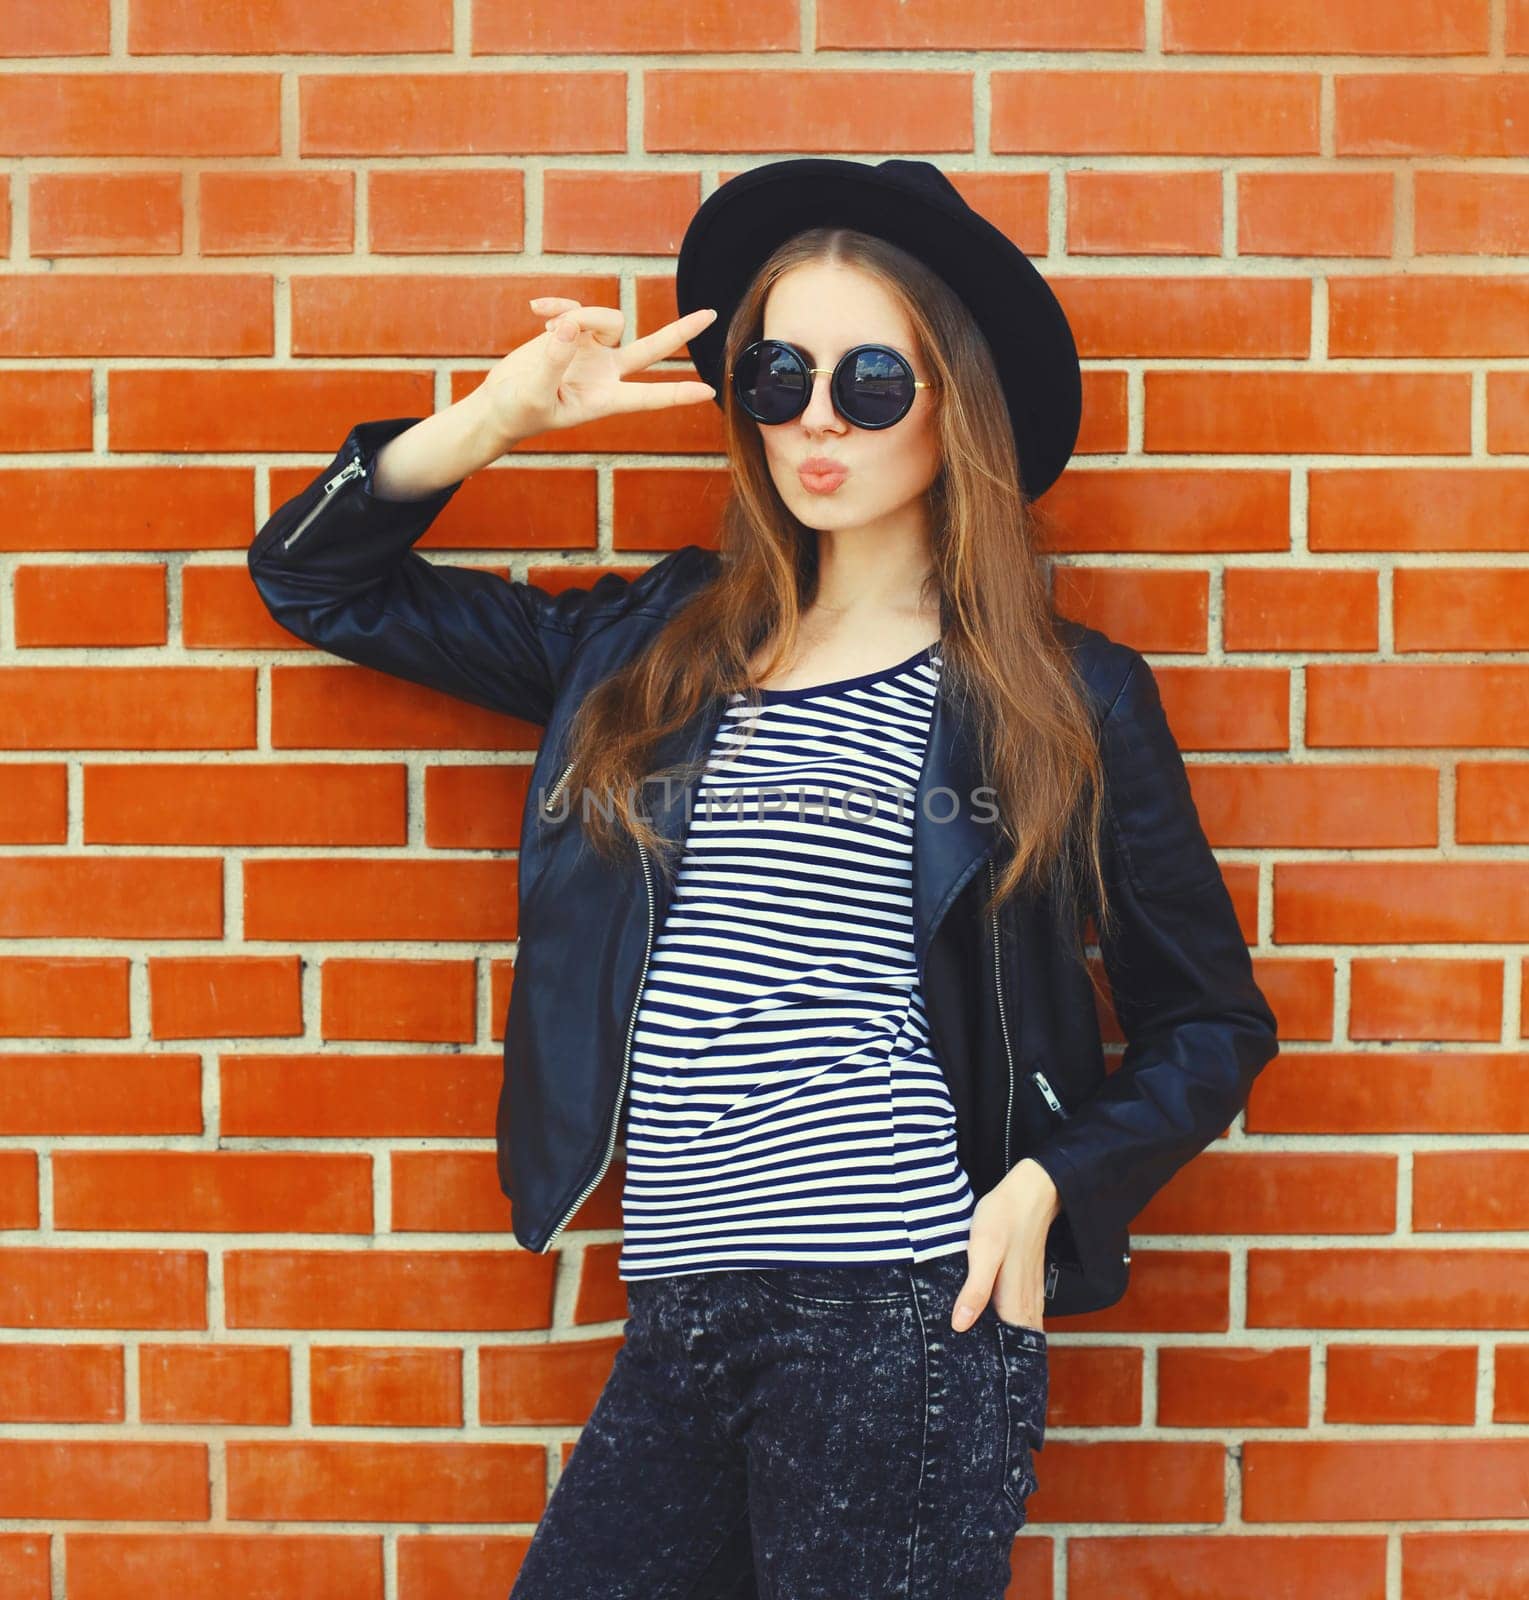 Portrait of stylish young woman model wearing black round hat, leather jacket in rock style on city street on brick wall background